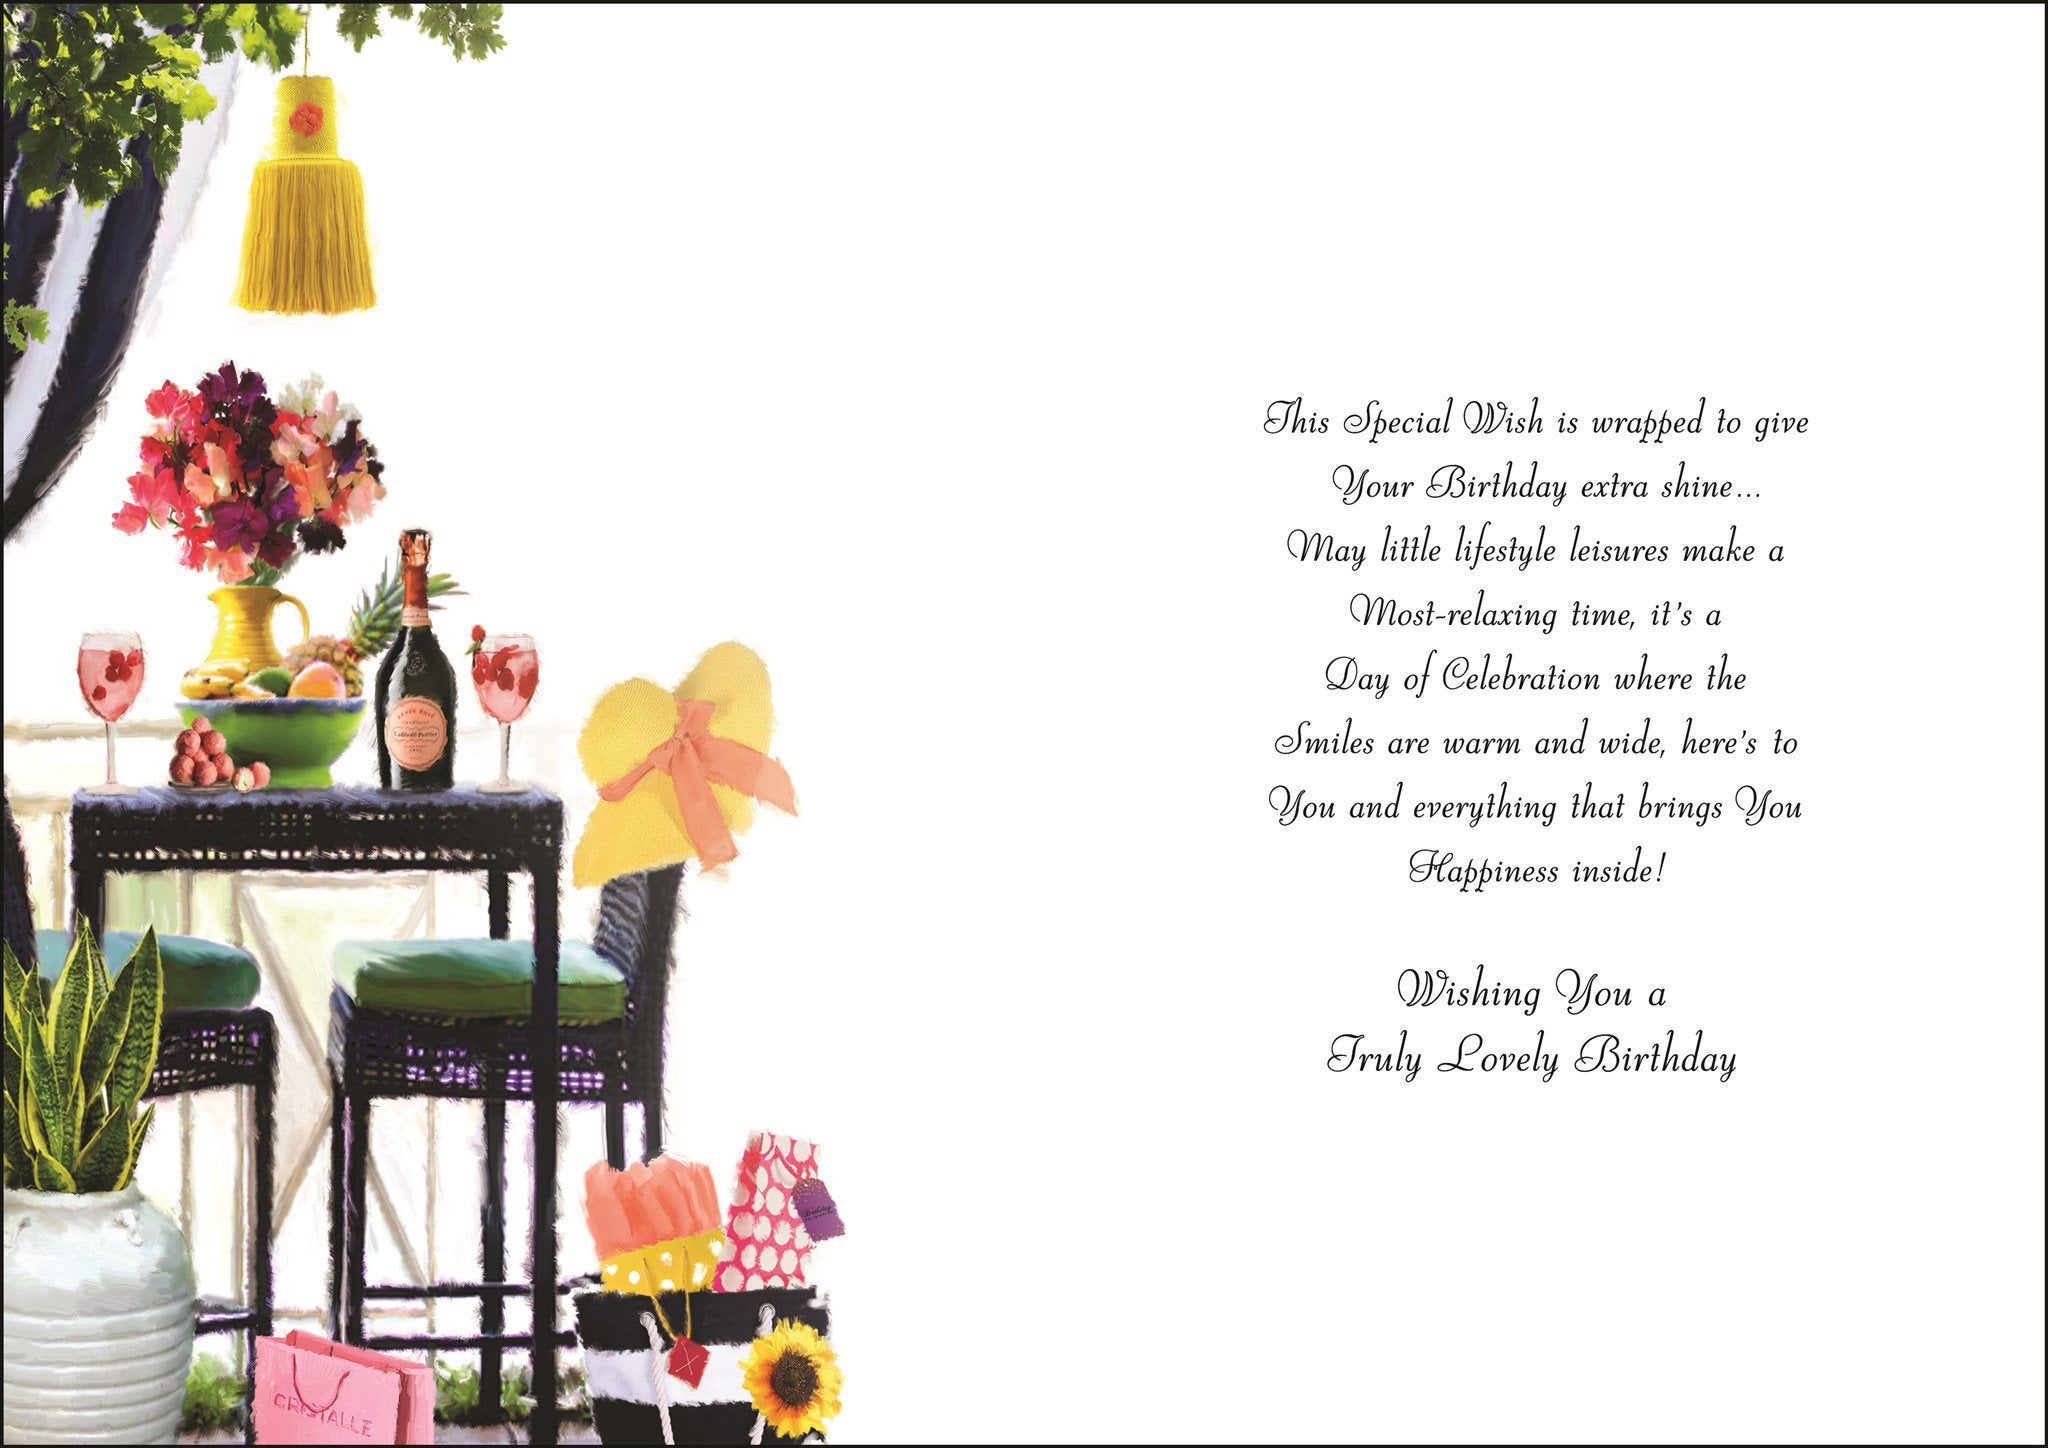 Inside of Sister in Law Yellow Hat Birthday Greetings Card